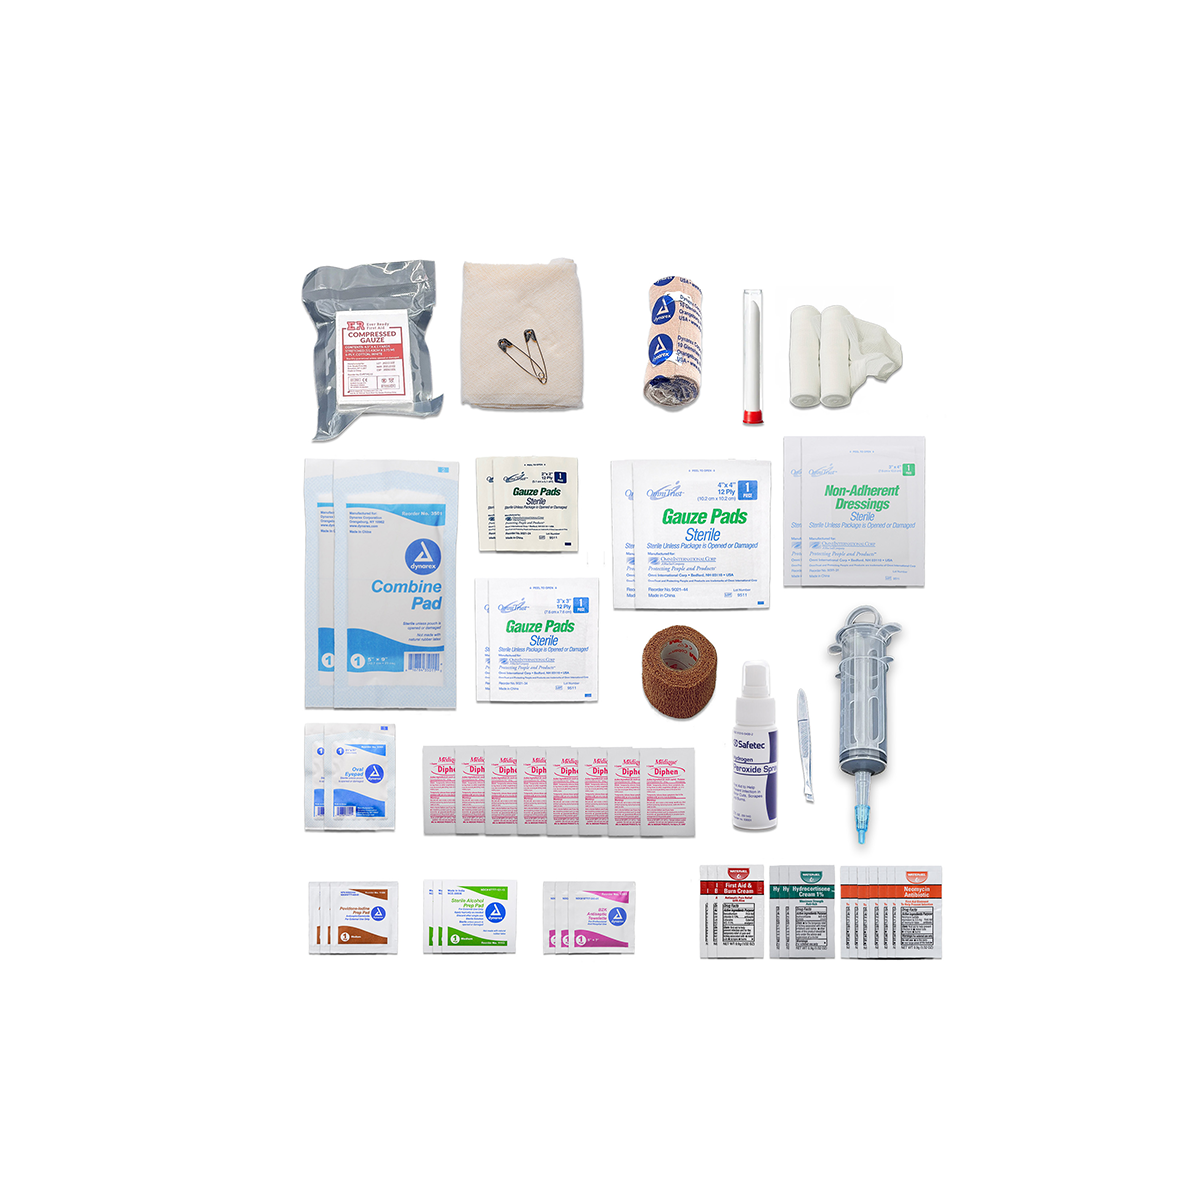 Components of Critter Care Essentials Pet First Aid Kit.